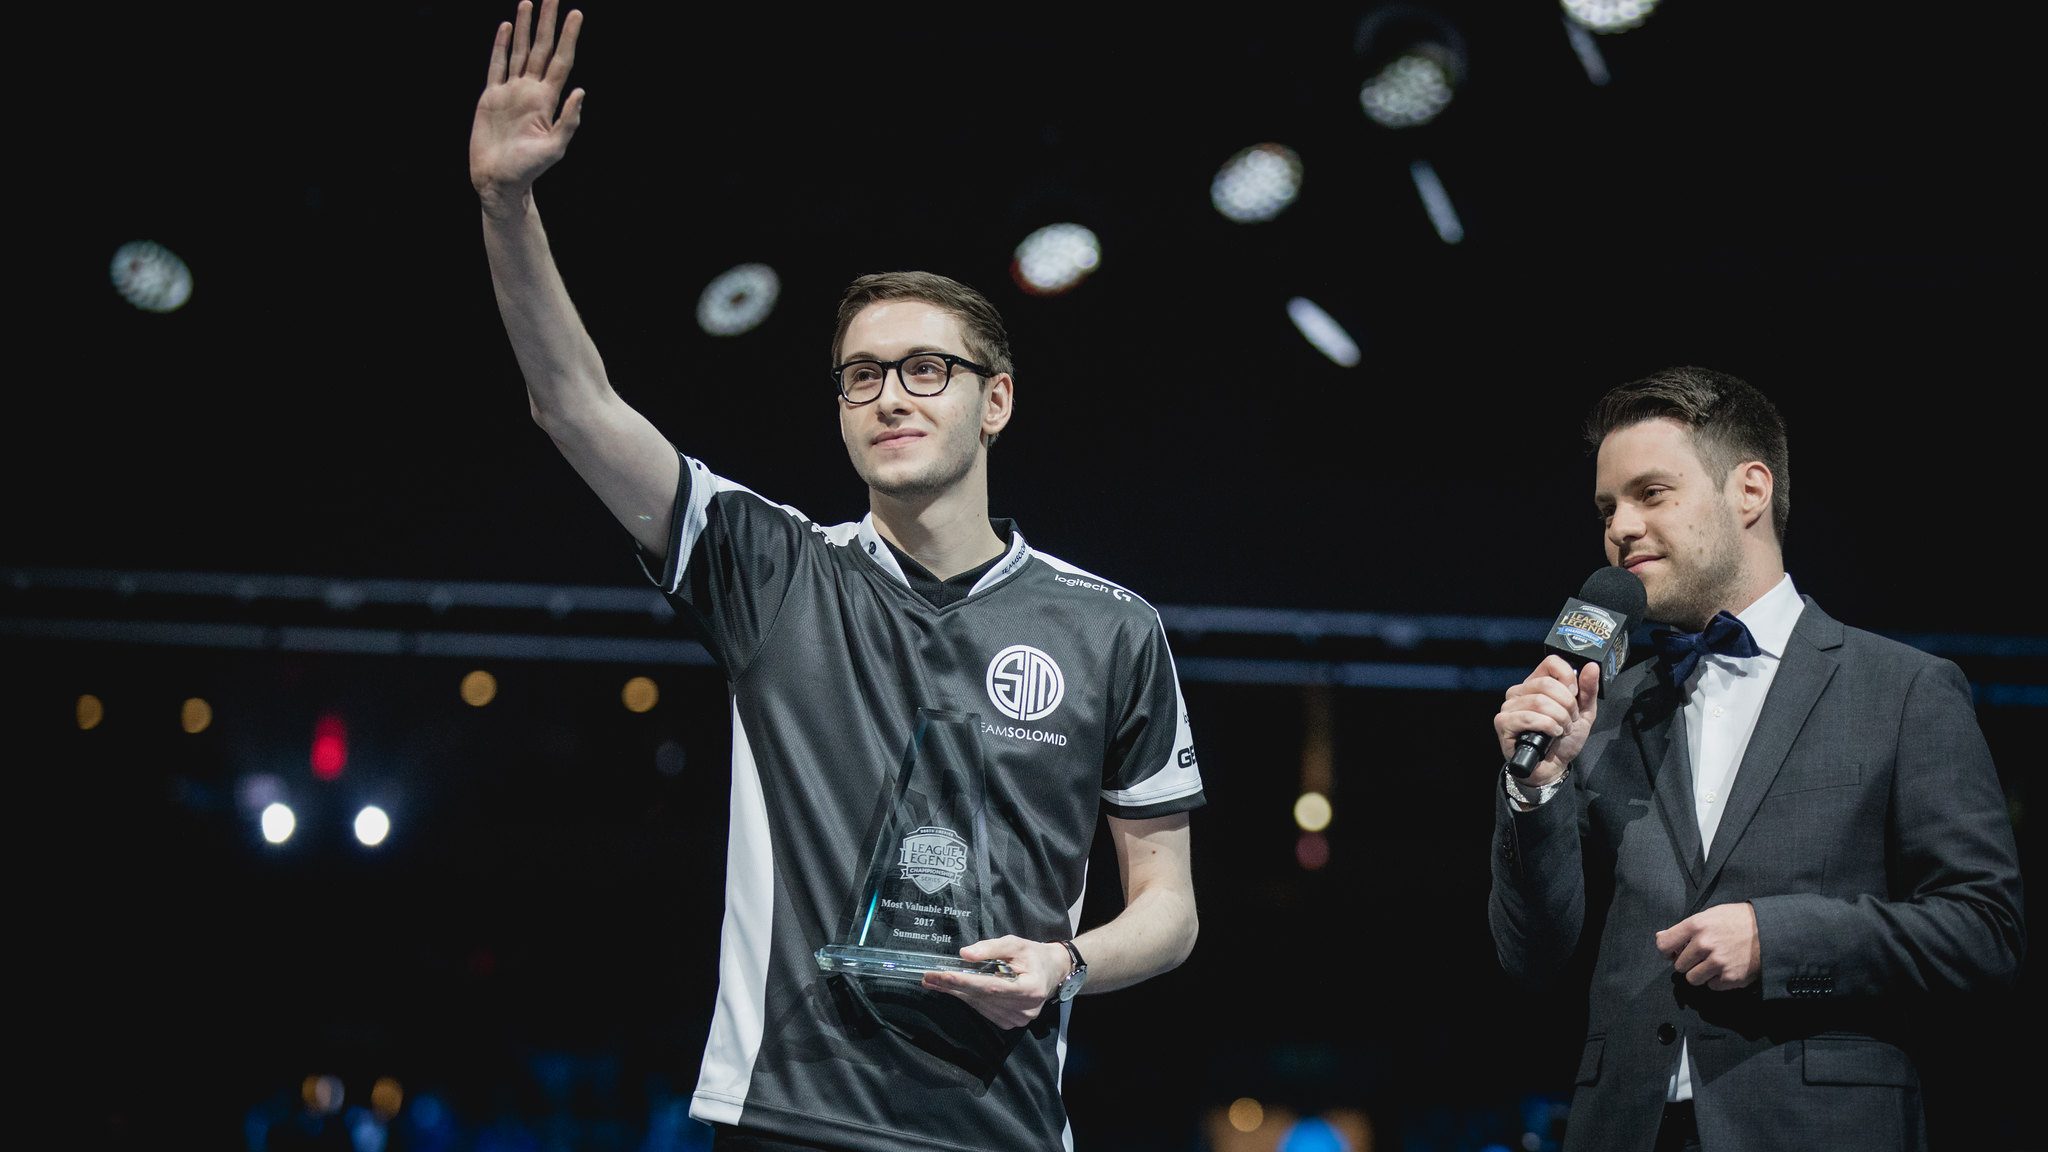 Bjergsen waves as he wins the 2017 LCS MVP award